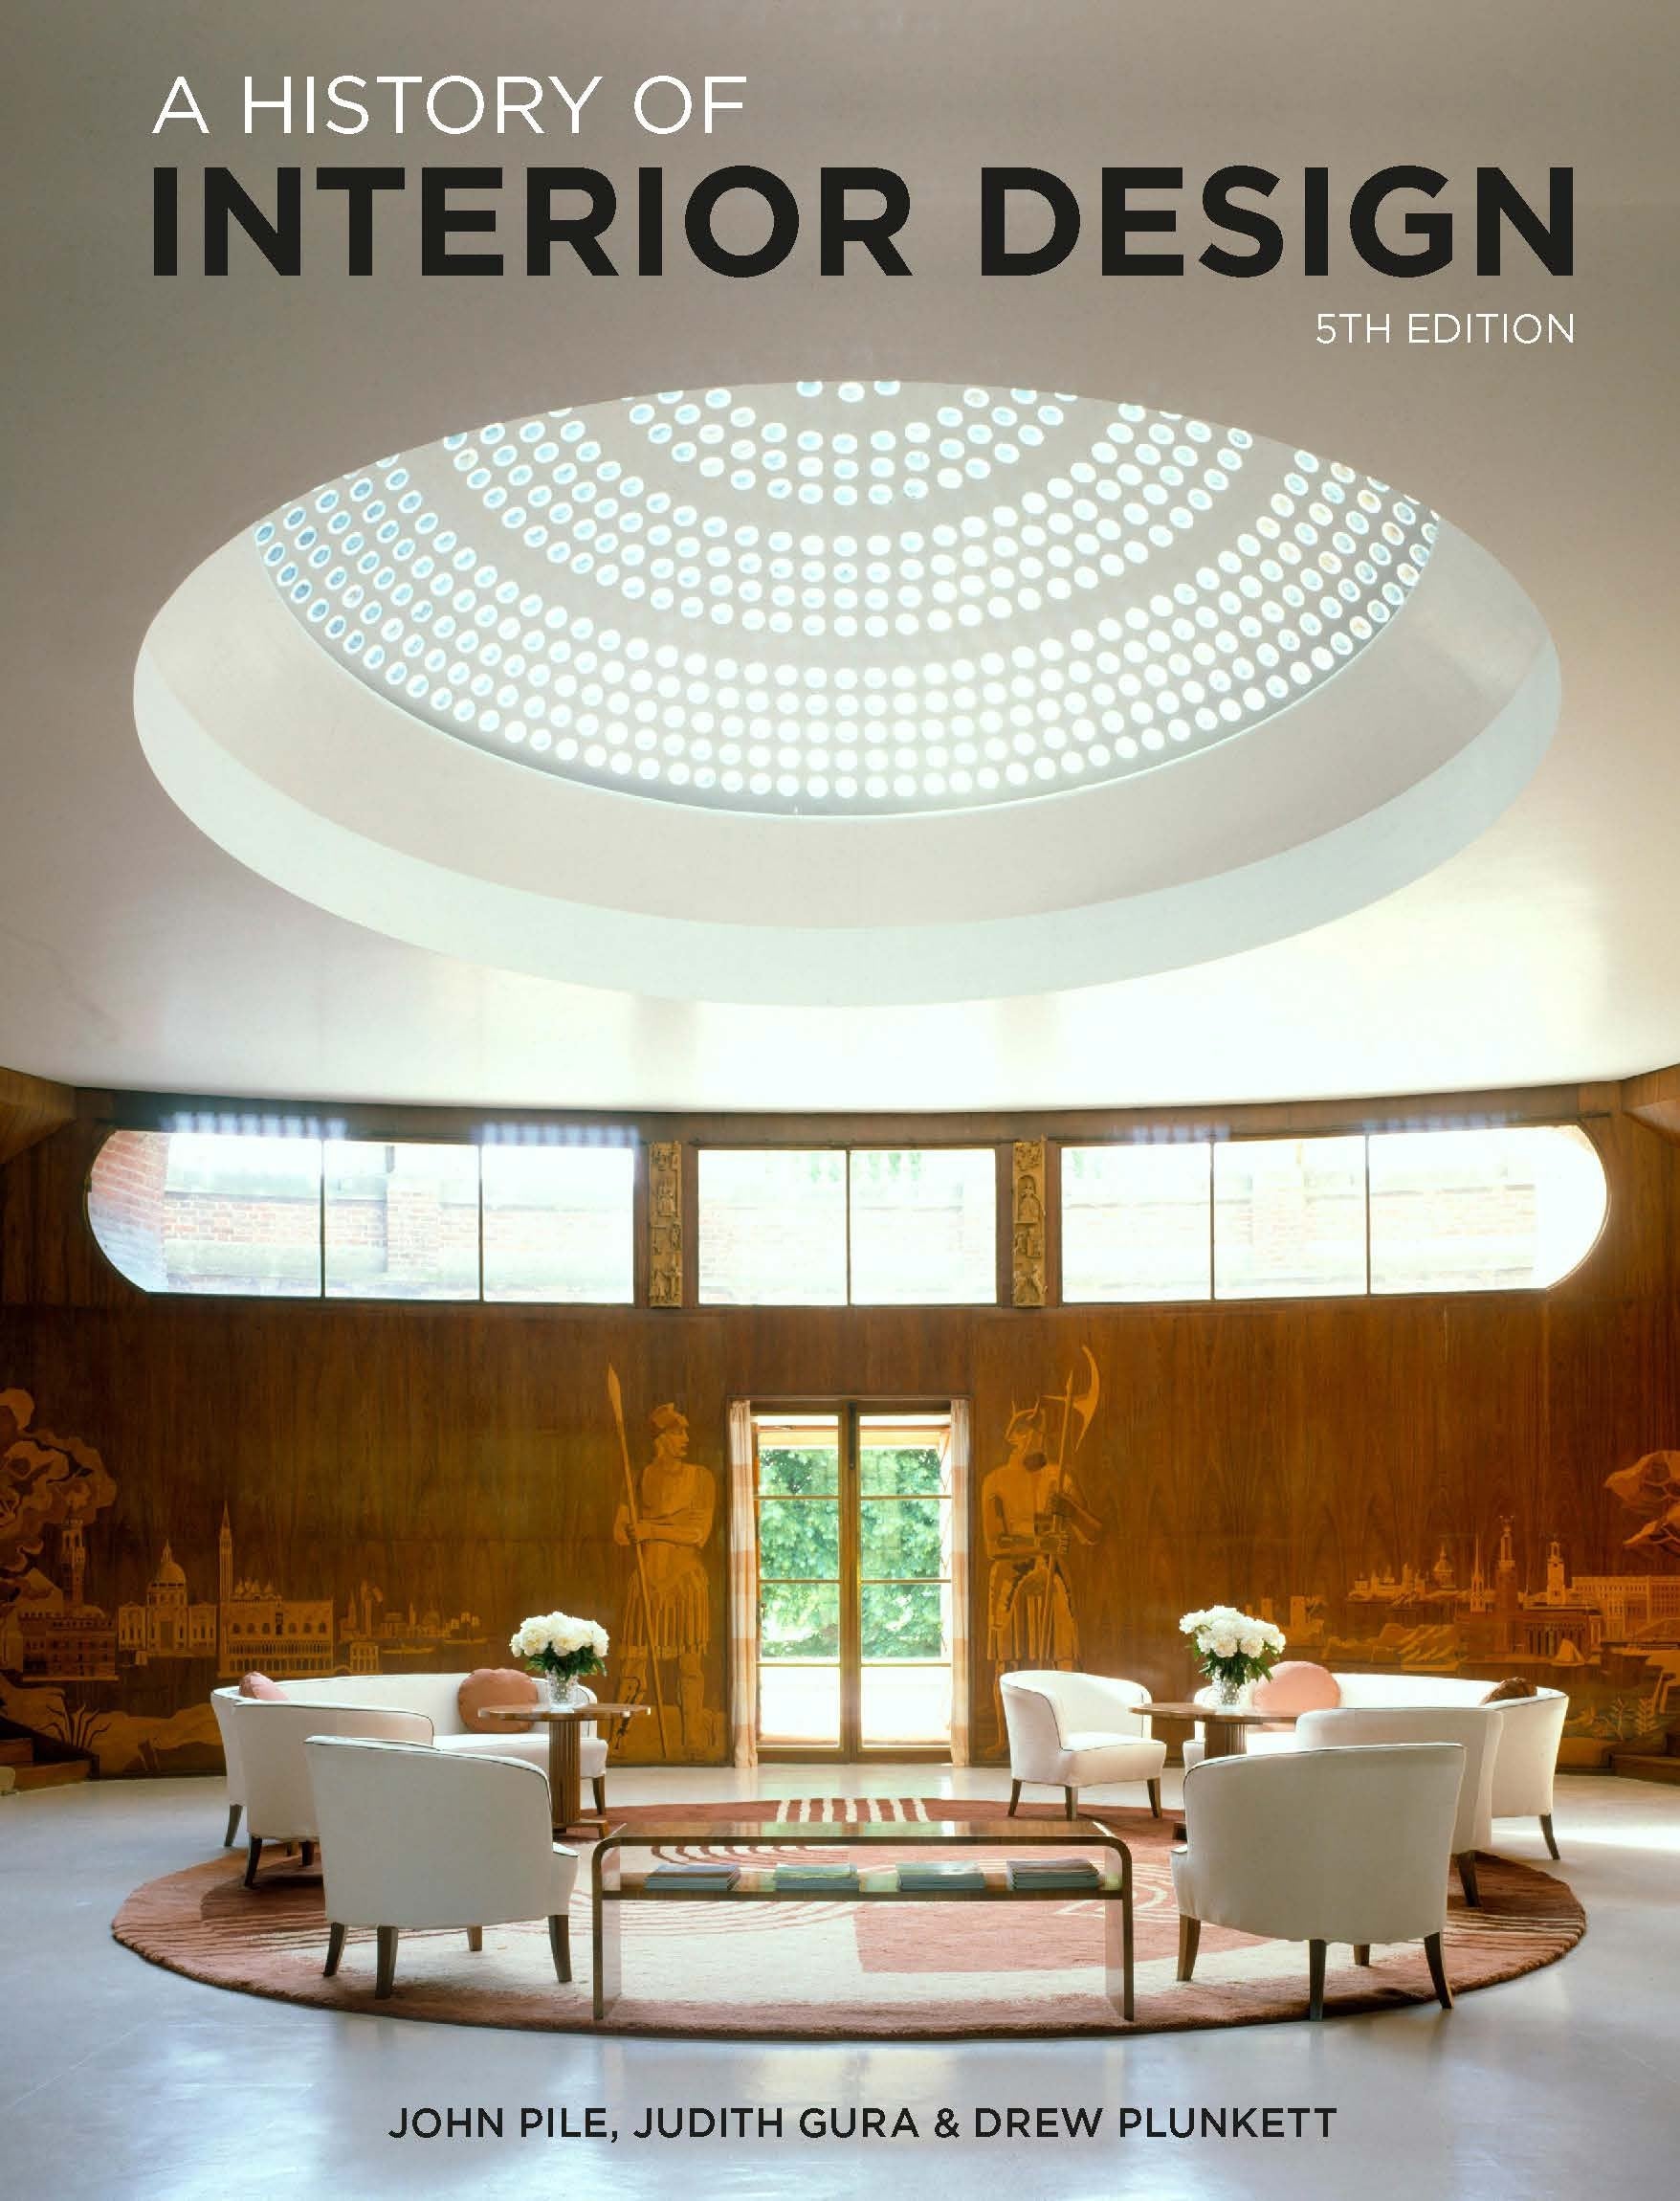 A History of Interior Design Fifth Edition by John Pile, Judith Gura, Drew Pile